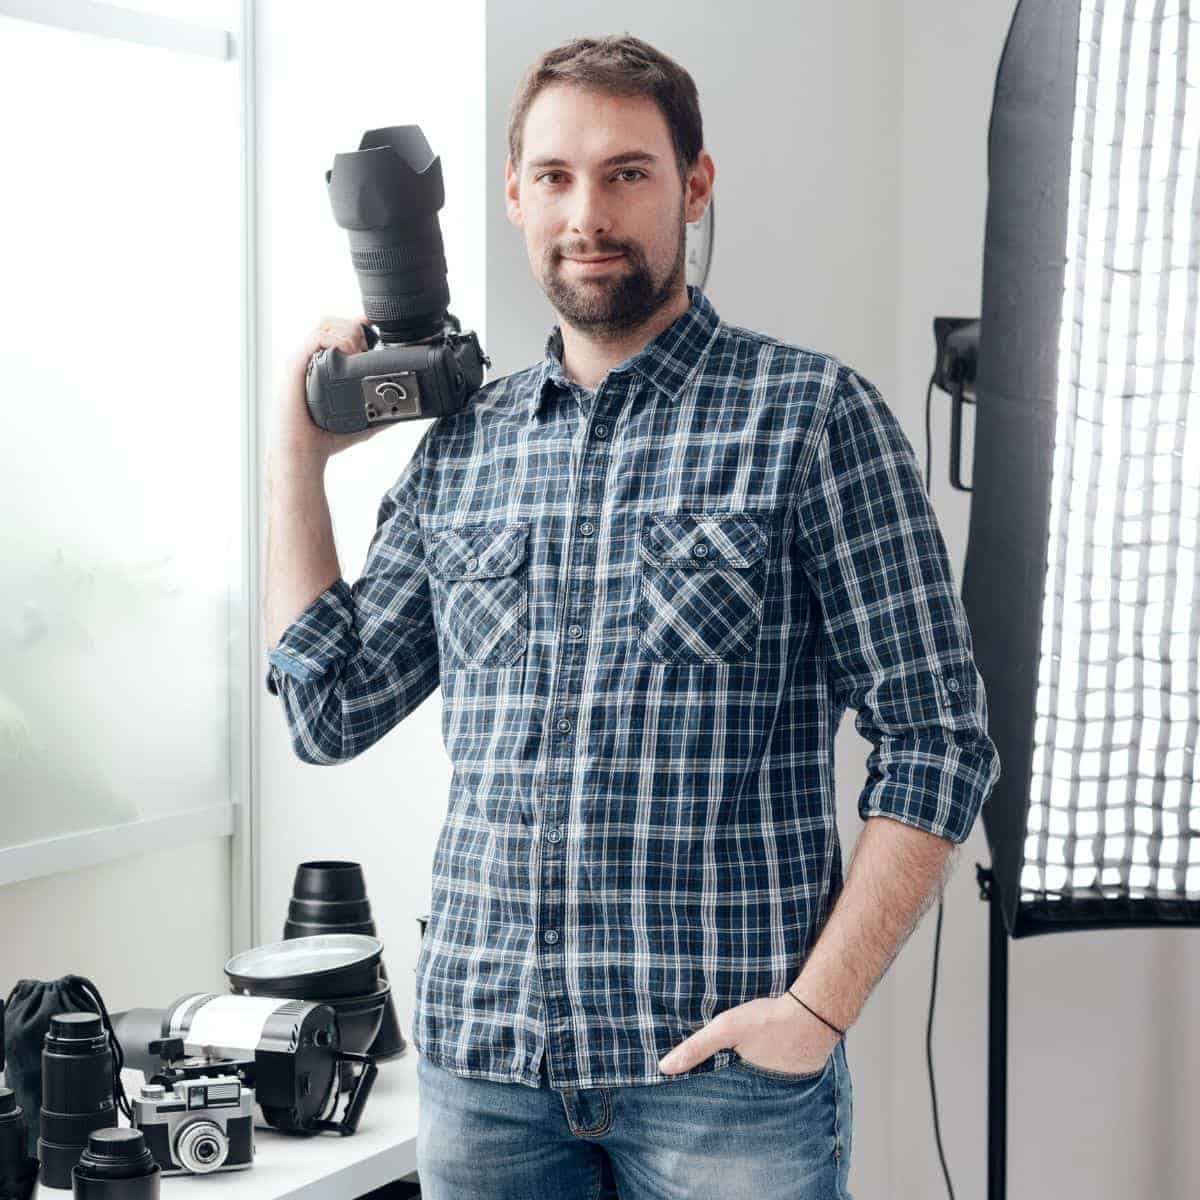 Photographer in a studio holding a camera next to lights, cameras, and lenses.